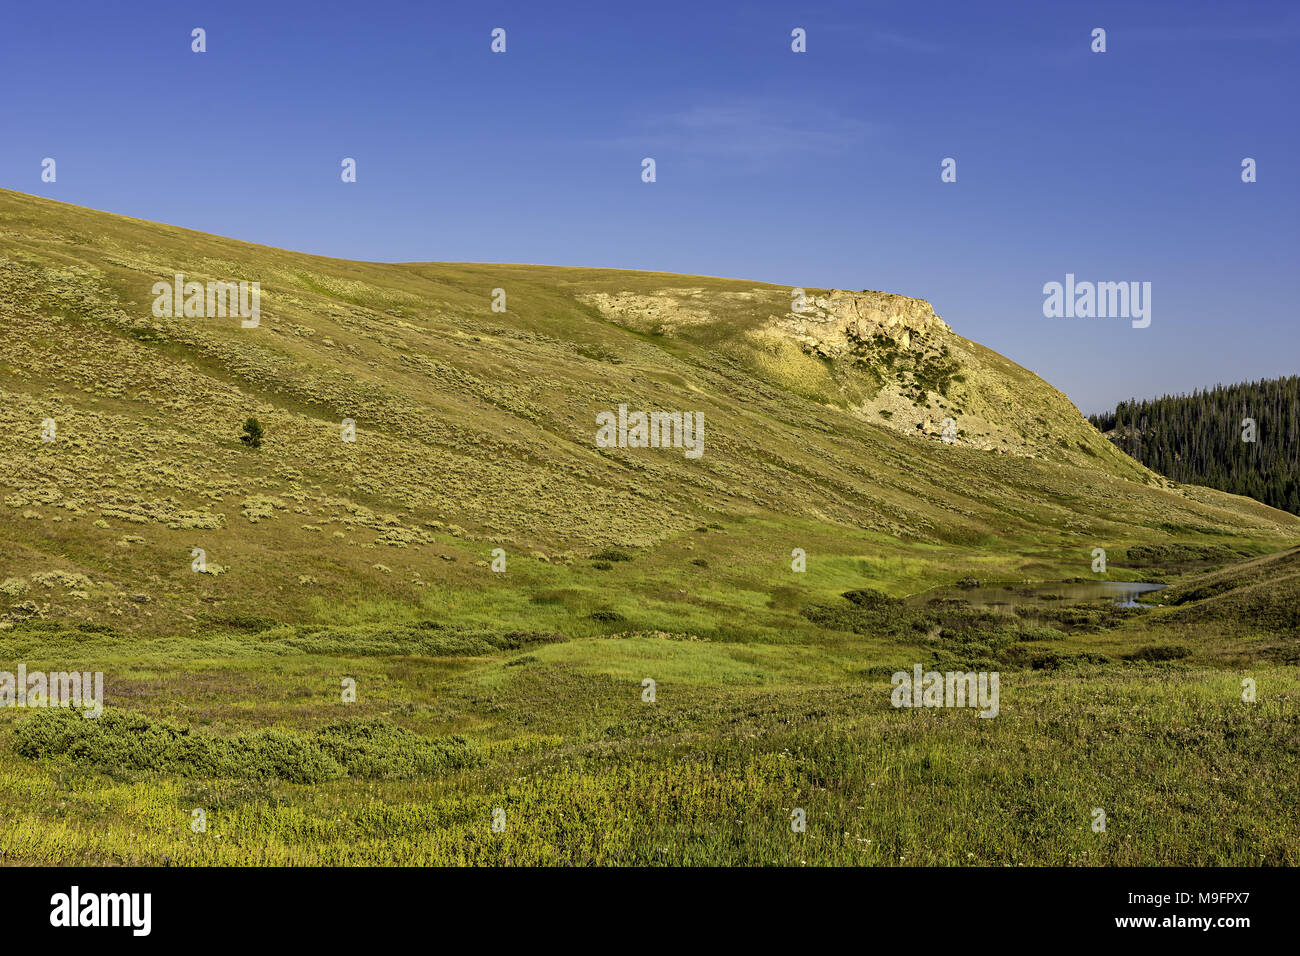 An alpine meadow against a blue sky Bighorn National Forest Wyoming USA Stock Photo